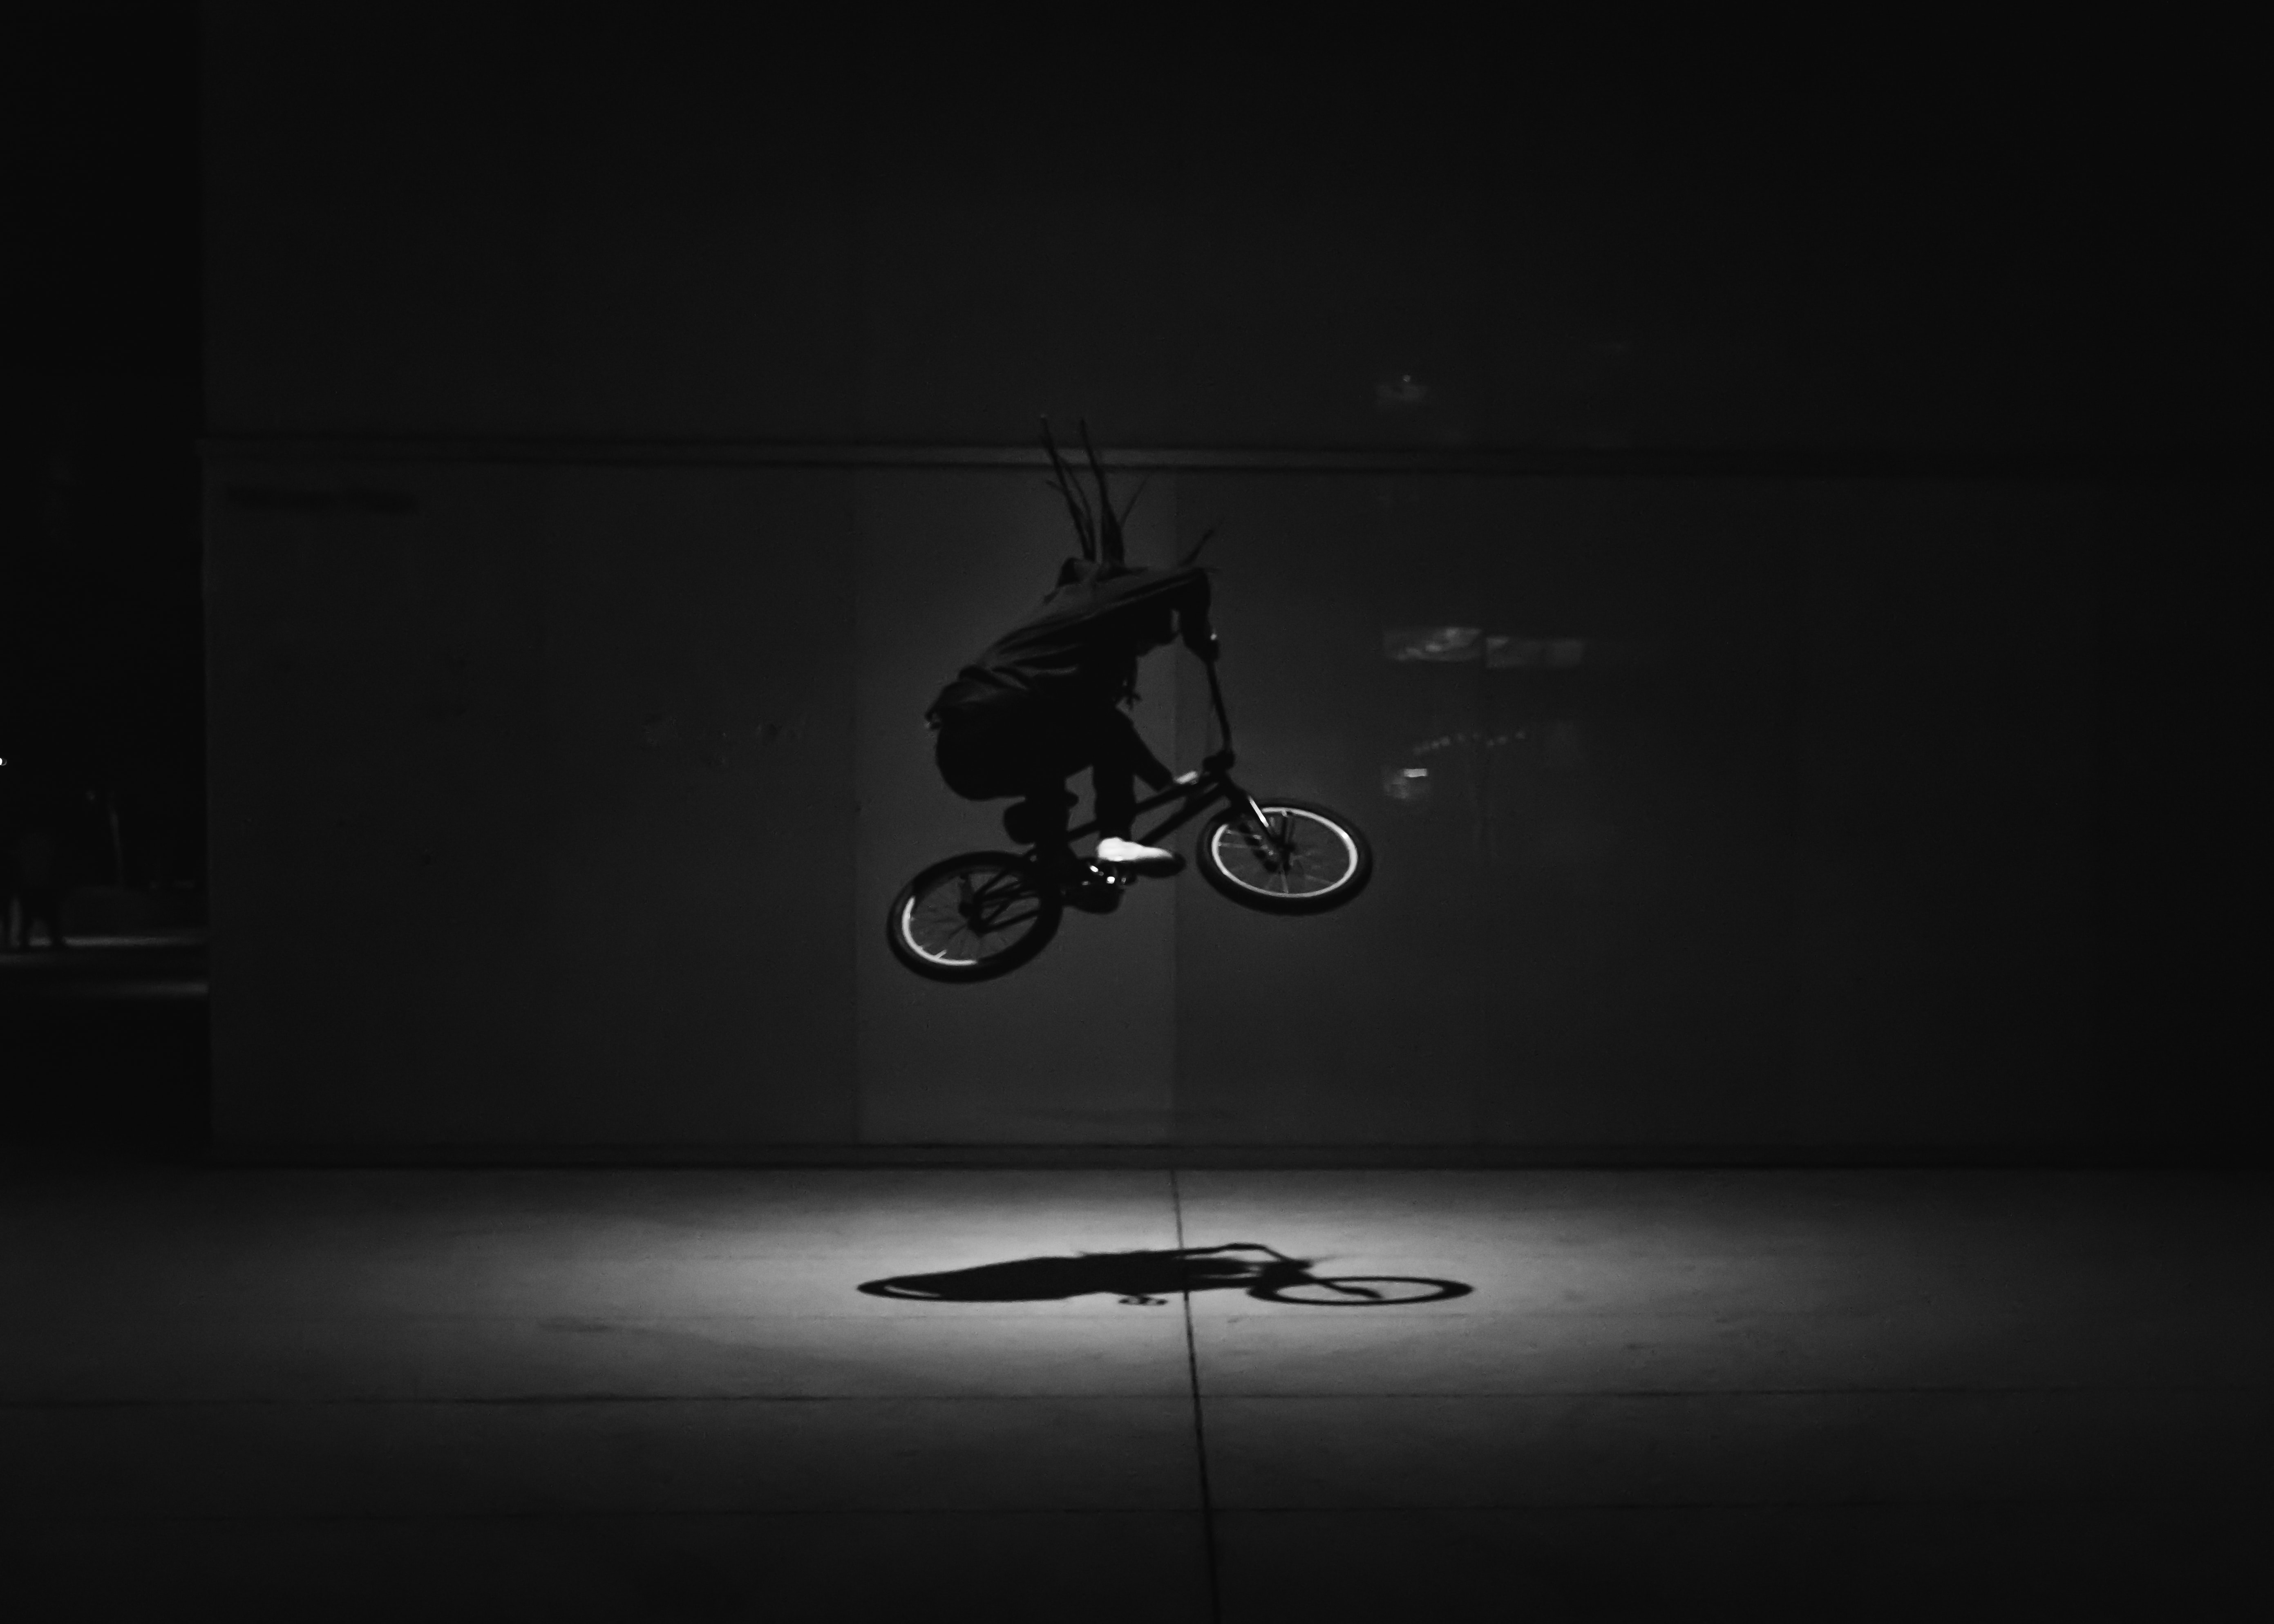 bmx, sports, black, jump, bounce, bicycle, trick Aesthetic wallpaper